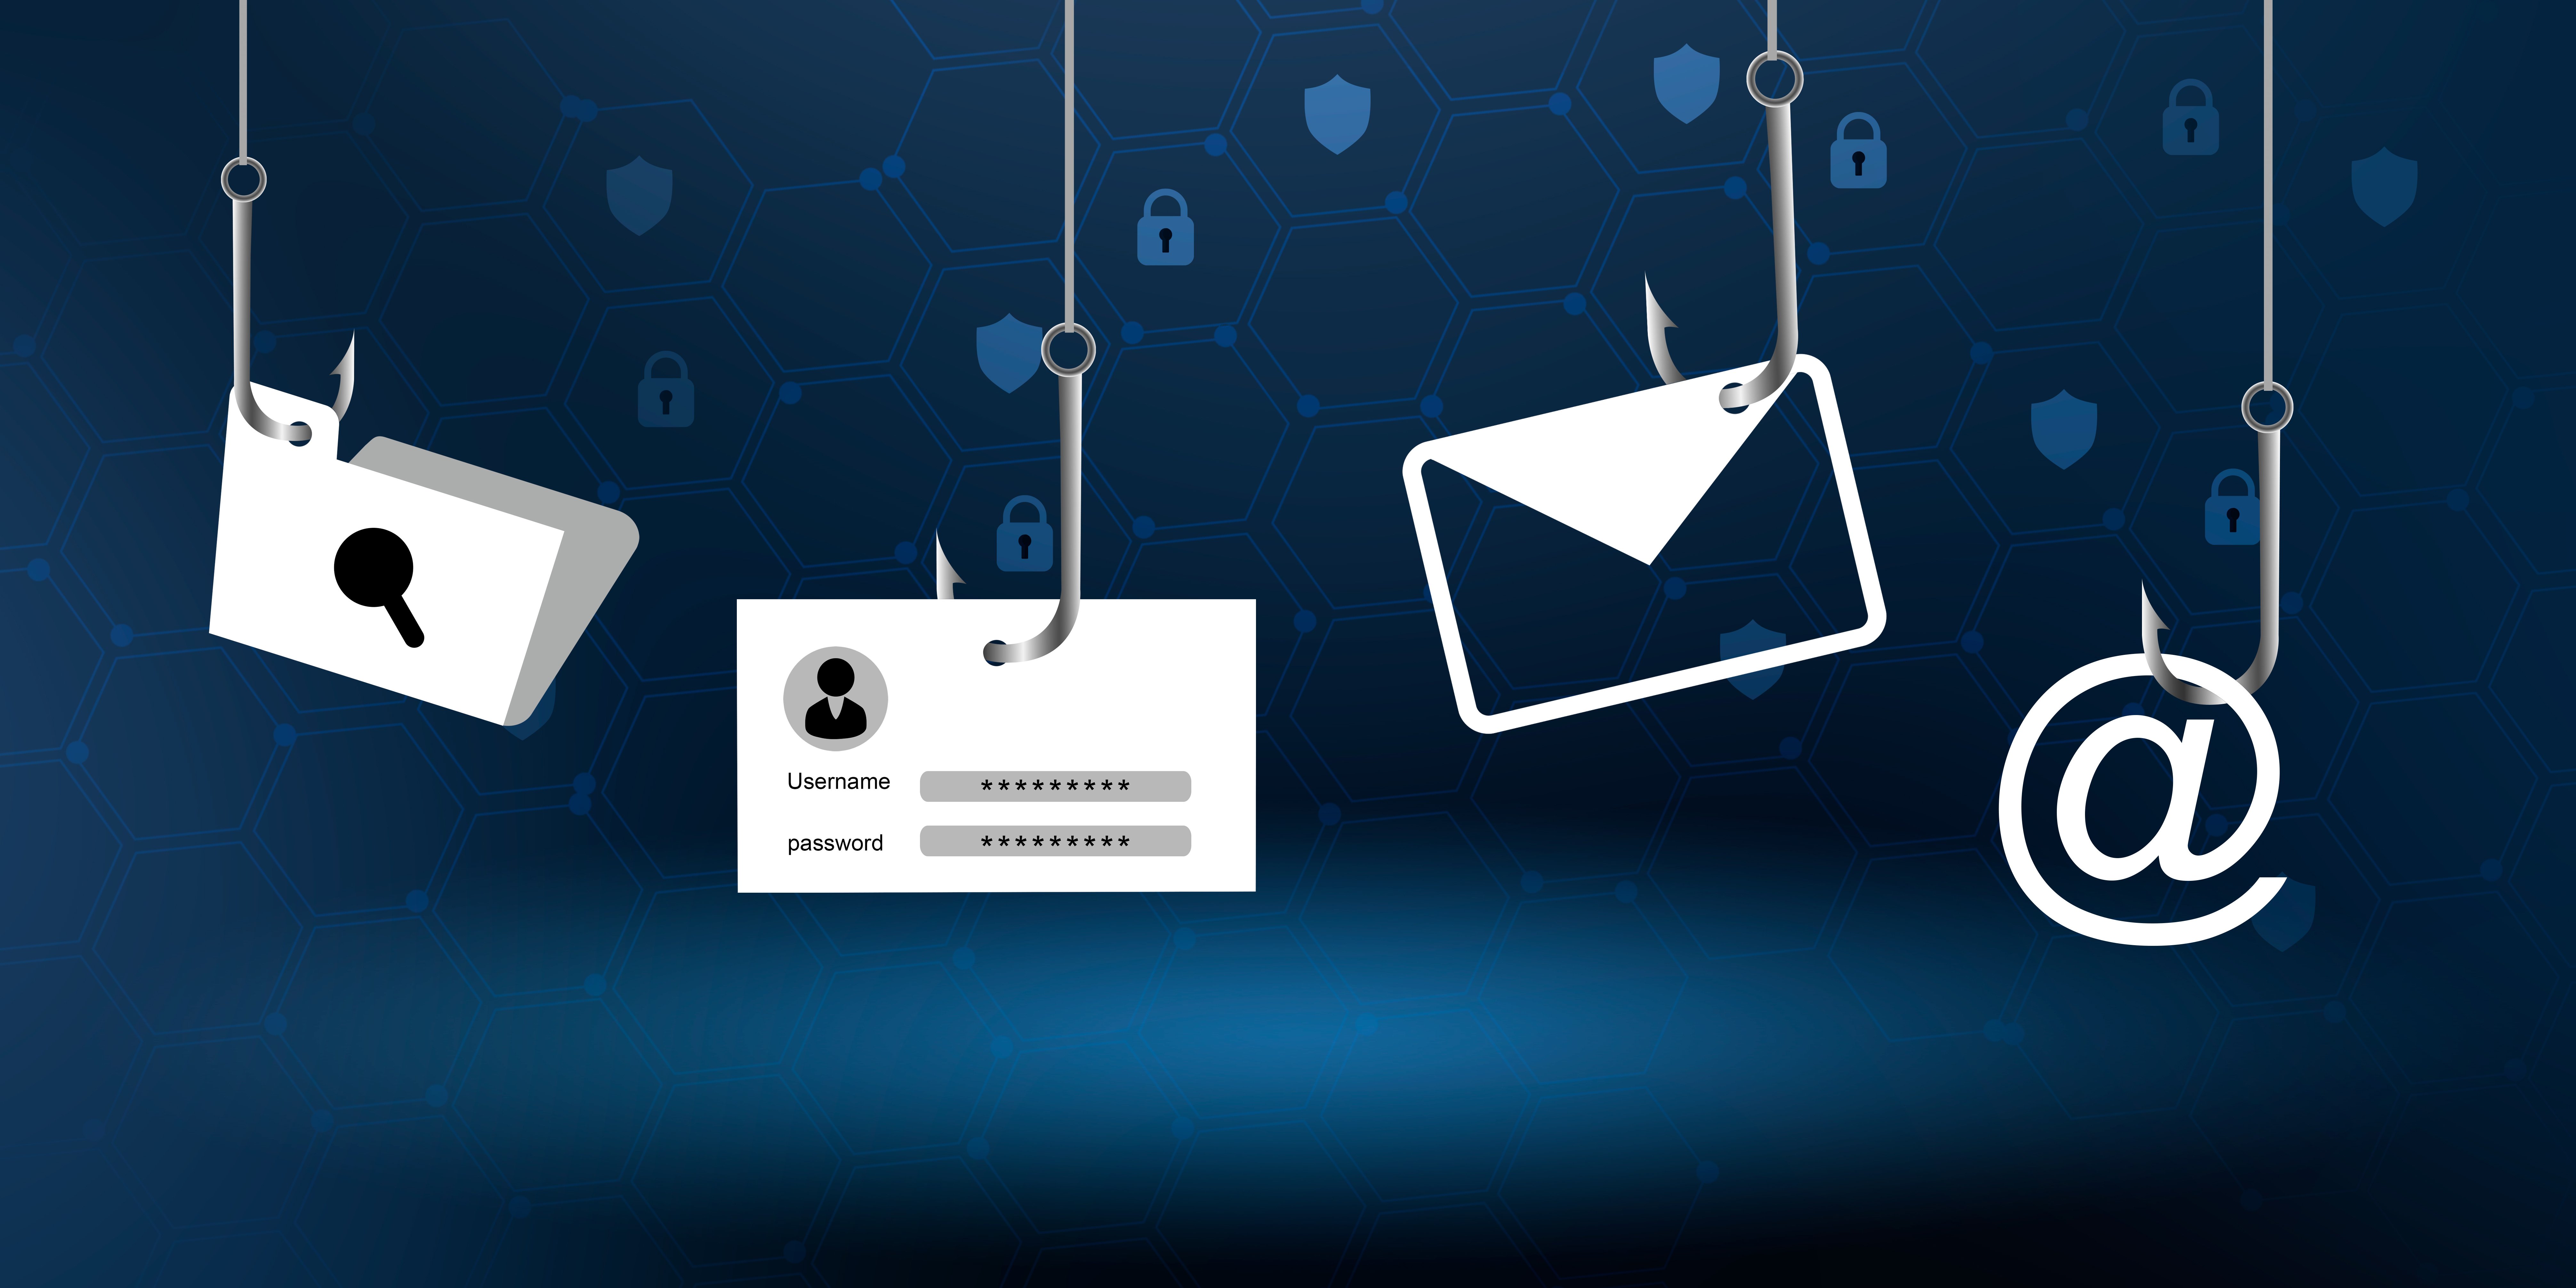 Do You Know How to Spot a BEC Phishing Attack?